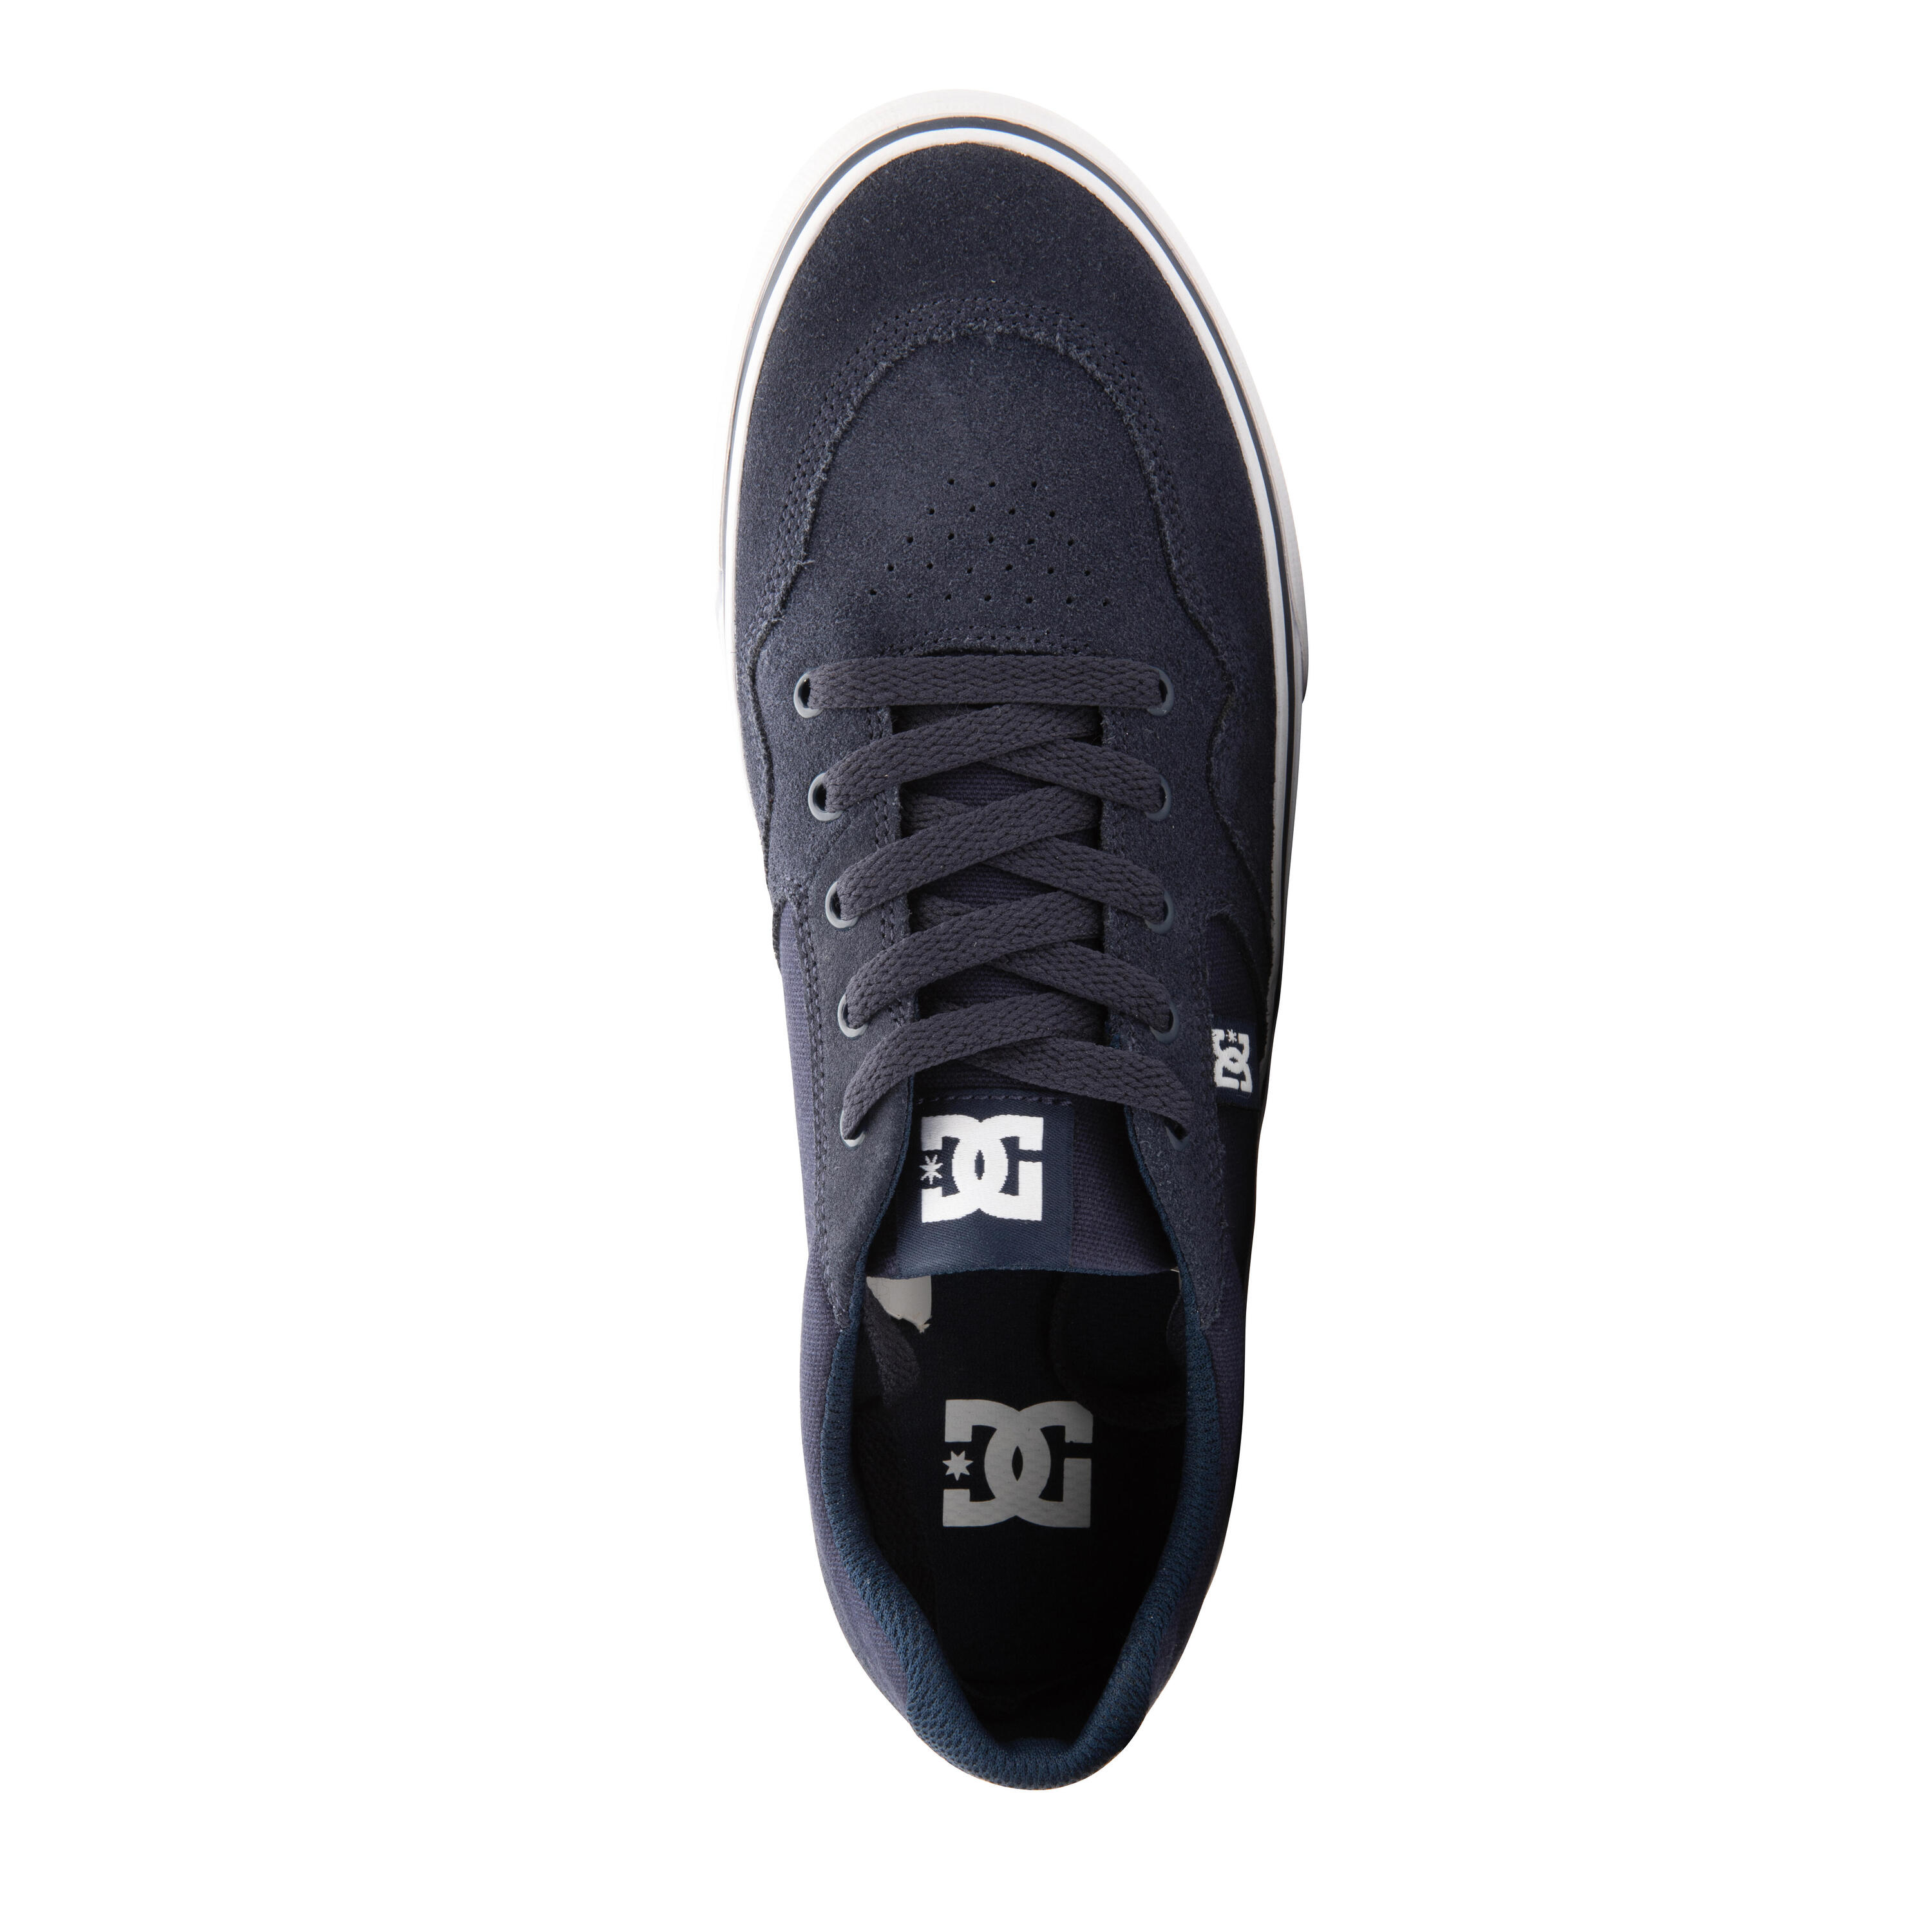 Adult Skate Shoes Rowlan - Blue 7/11